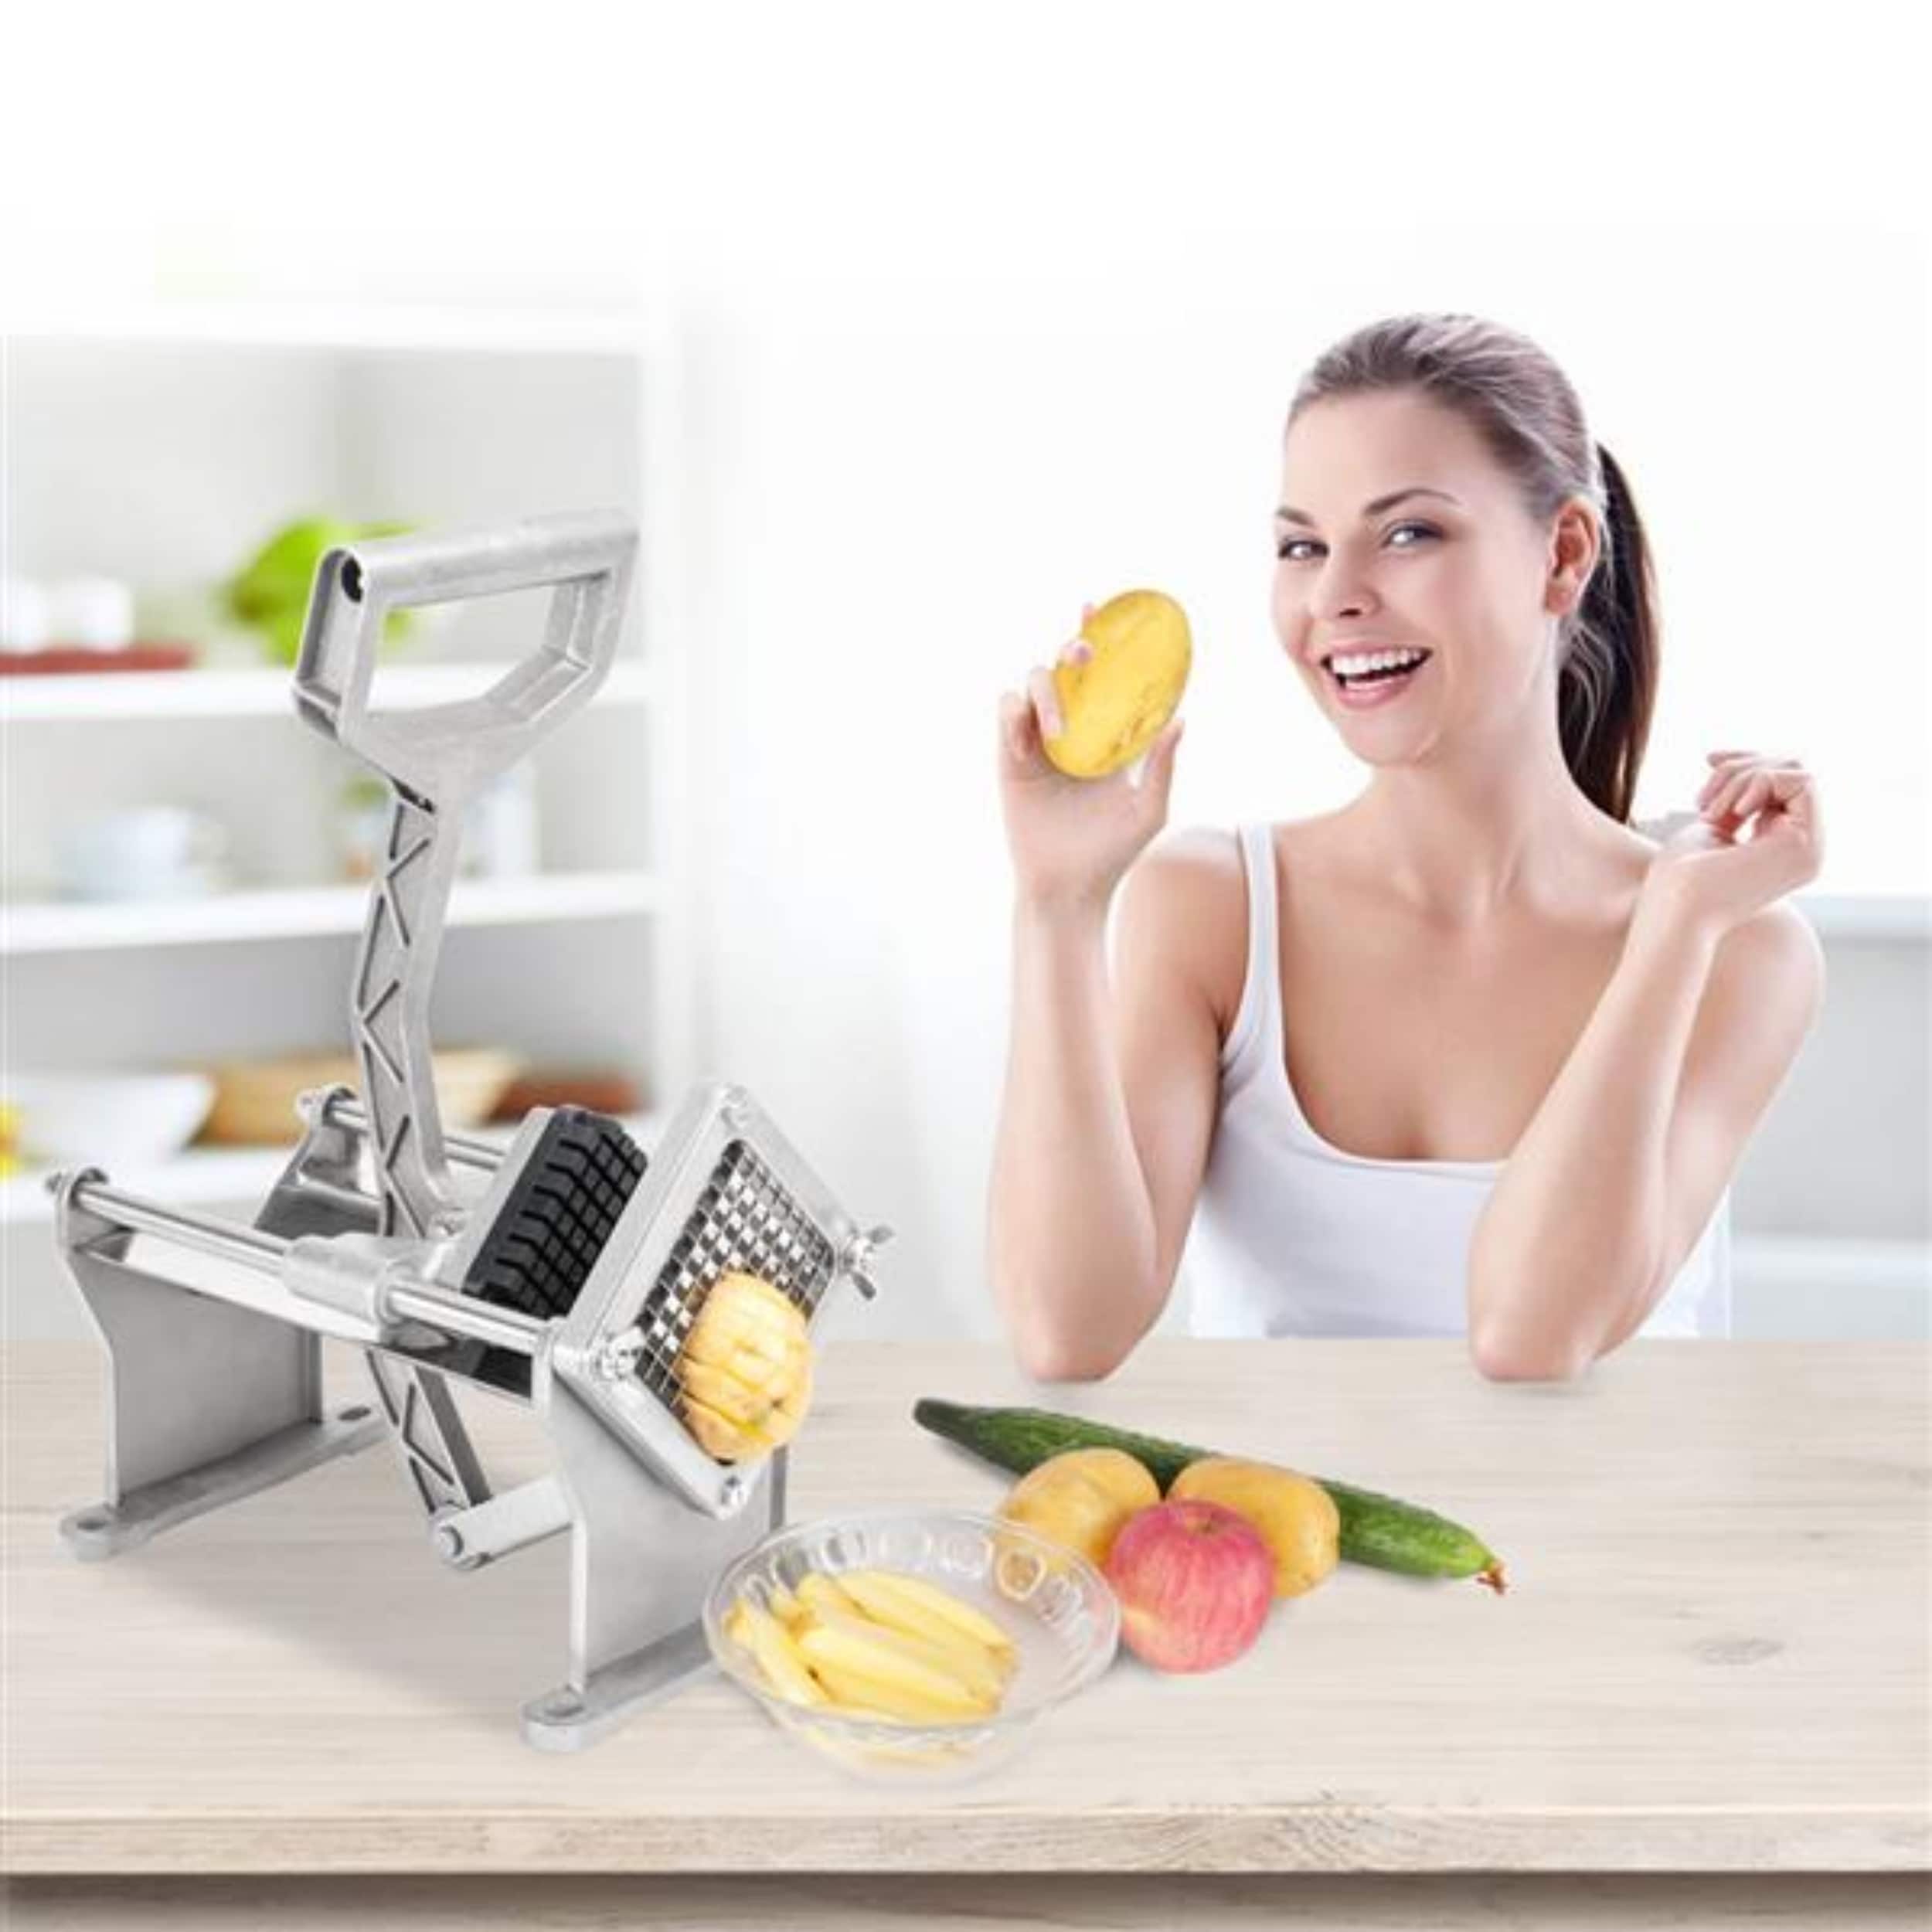 https://ak1.ostkcdn.com/images/products/is/images/direct/d9d16f577c07c45428fb04cce348ec9433b92fb3/Daily-Boutik-Vegetables-Slicer-Potato-Cutter-Commercial-French-Fry-Slicer-Cutters.jpg